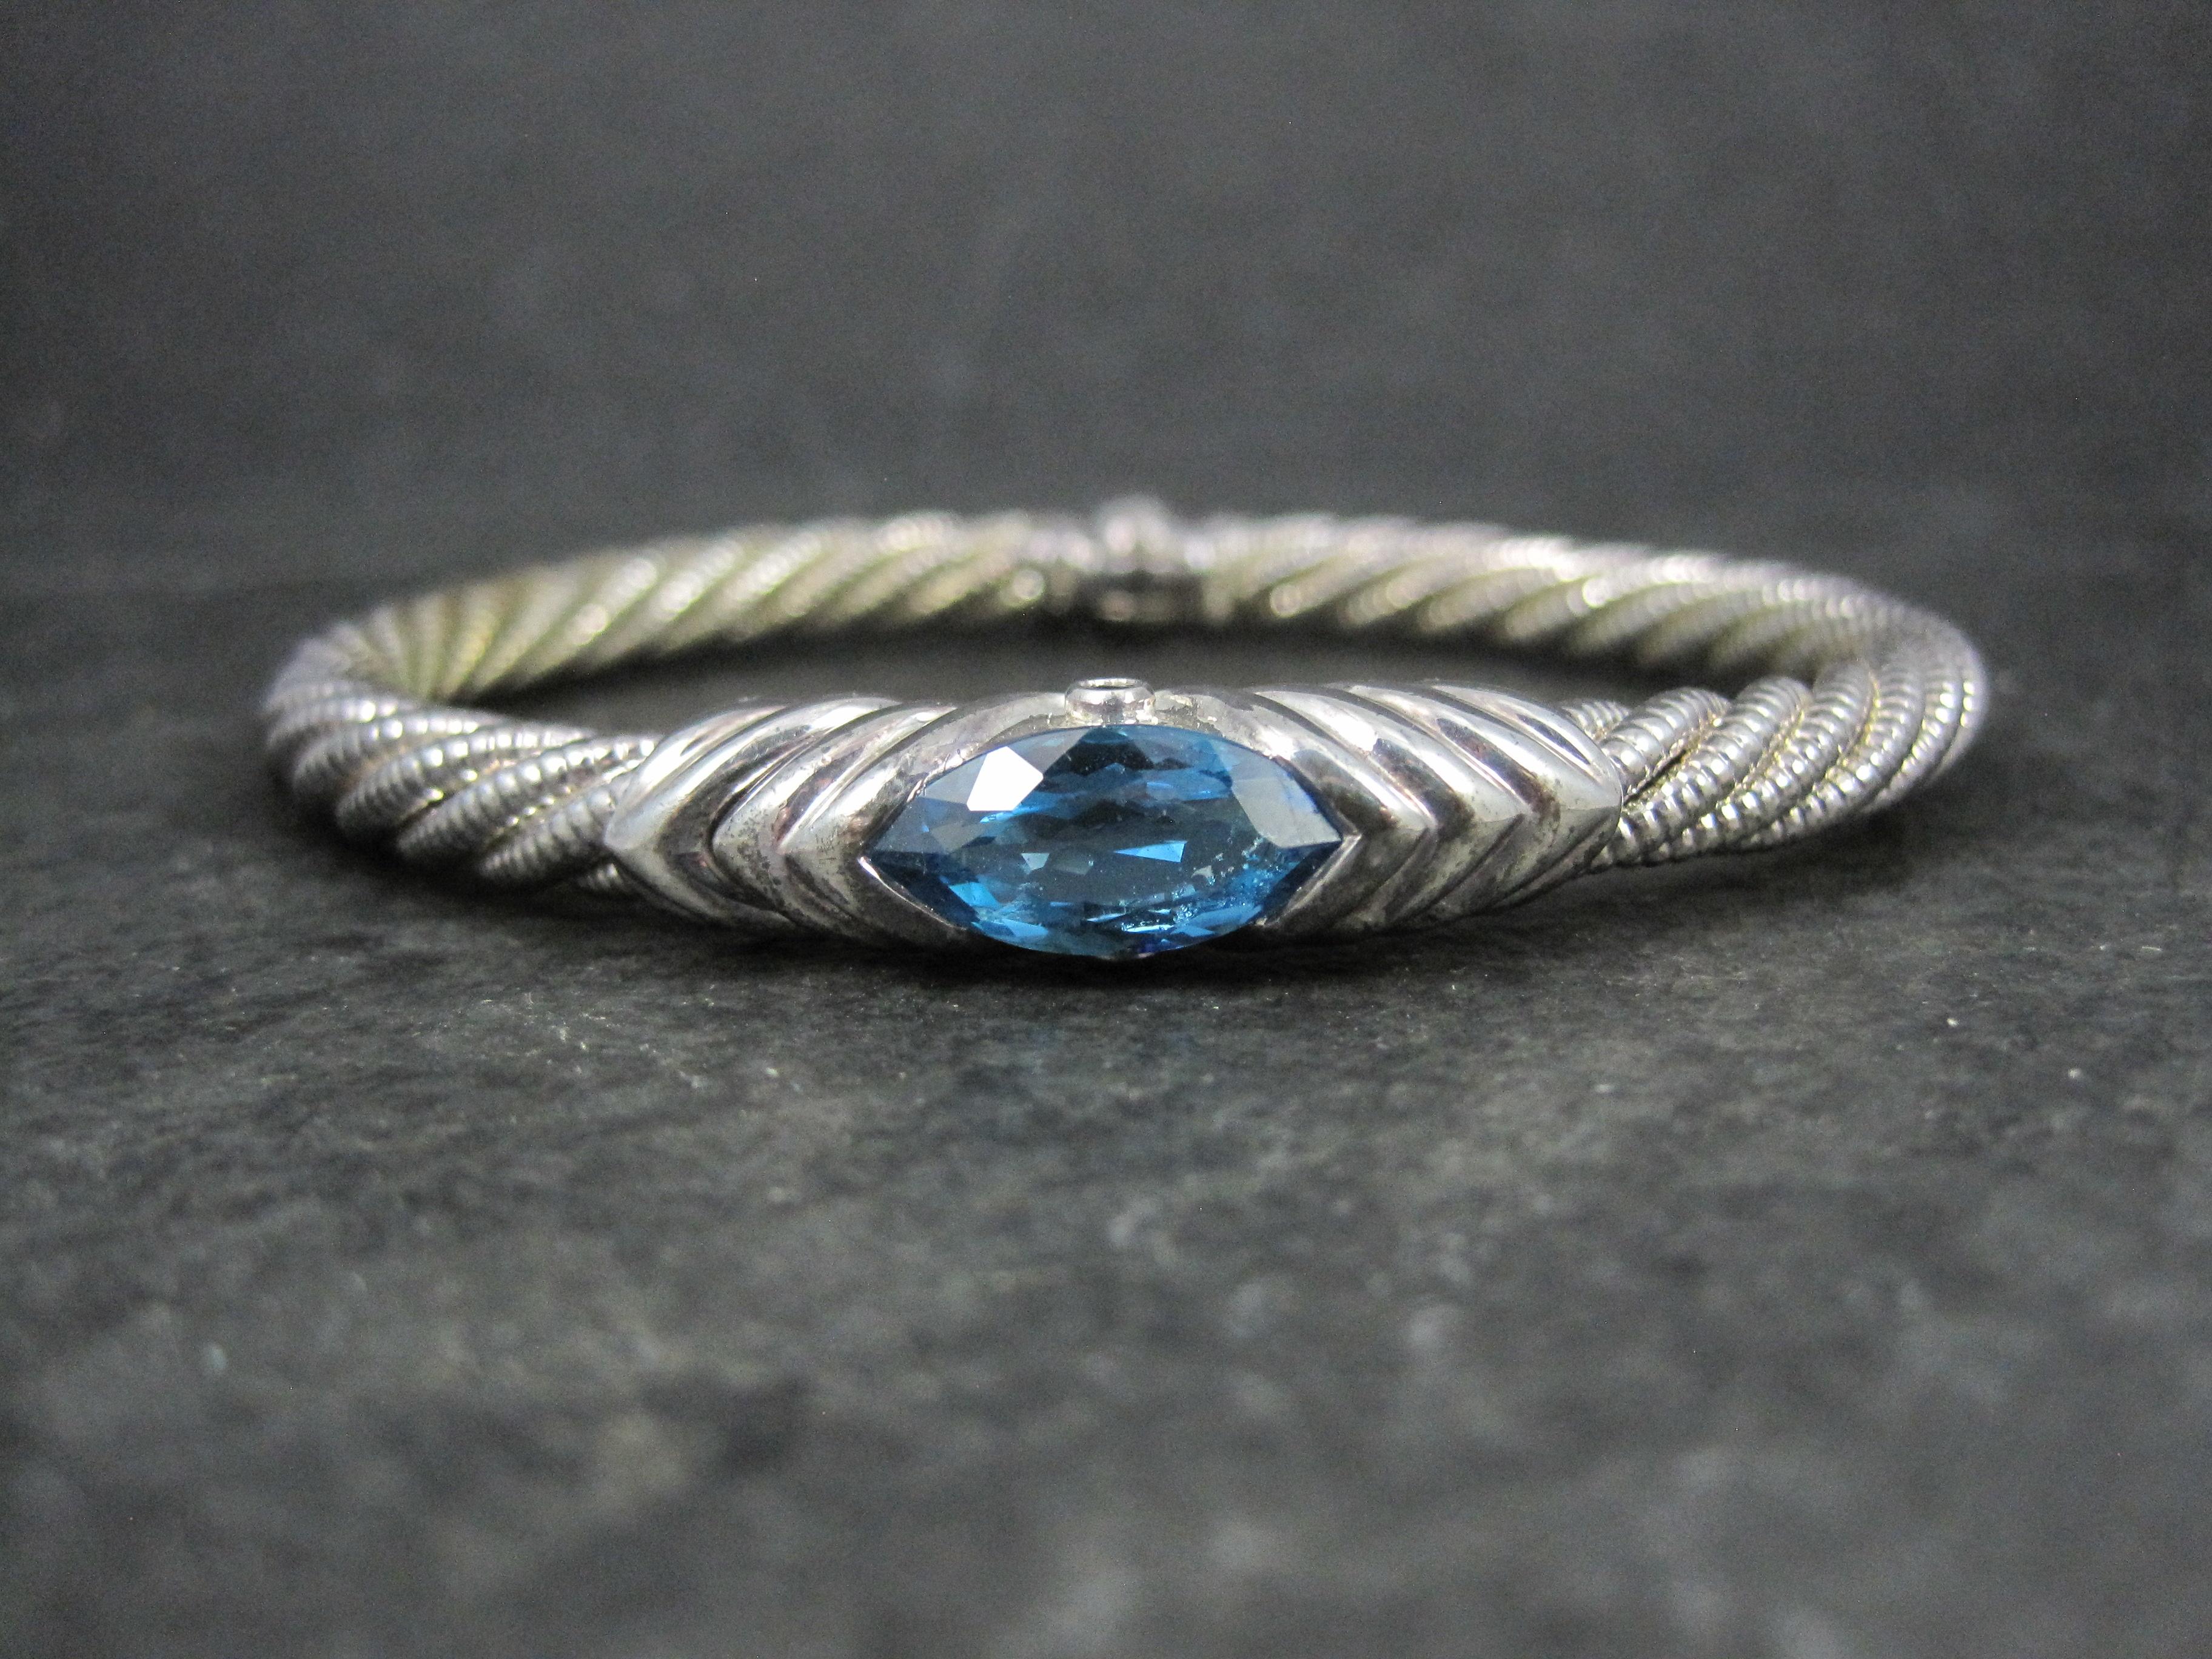 This gorgeous estate bangle bracelet is sterling silver.
It features a 7x14mm marquise cut blue topaz and 2 round 2mm sapphires.

Measurements: 3/8 of an inch at its widest point, Inner circumference of 6 3/4 inches, Inner diameter of 2 by 2 1/2